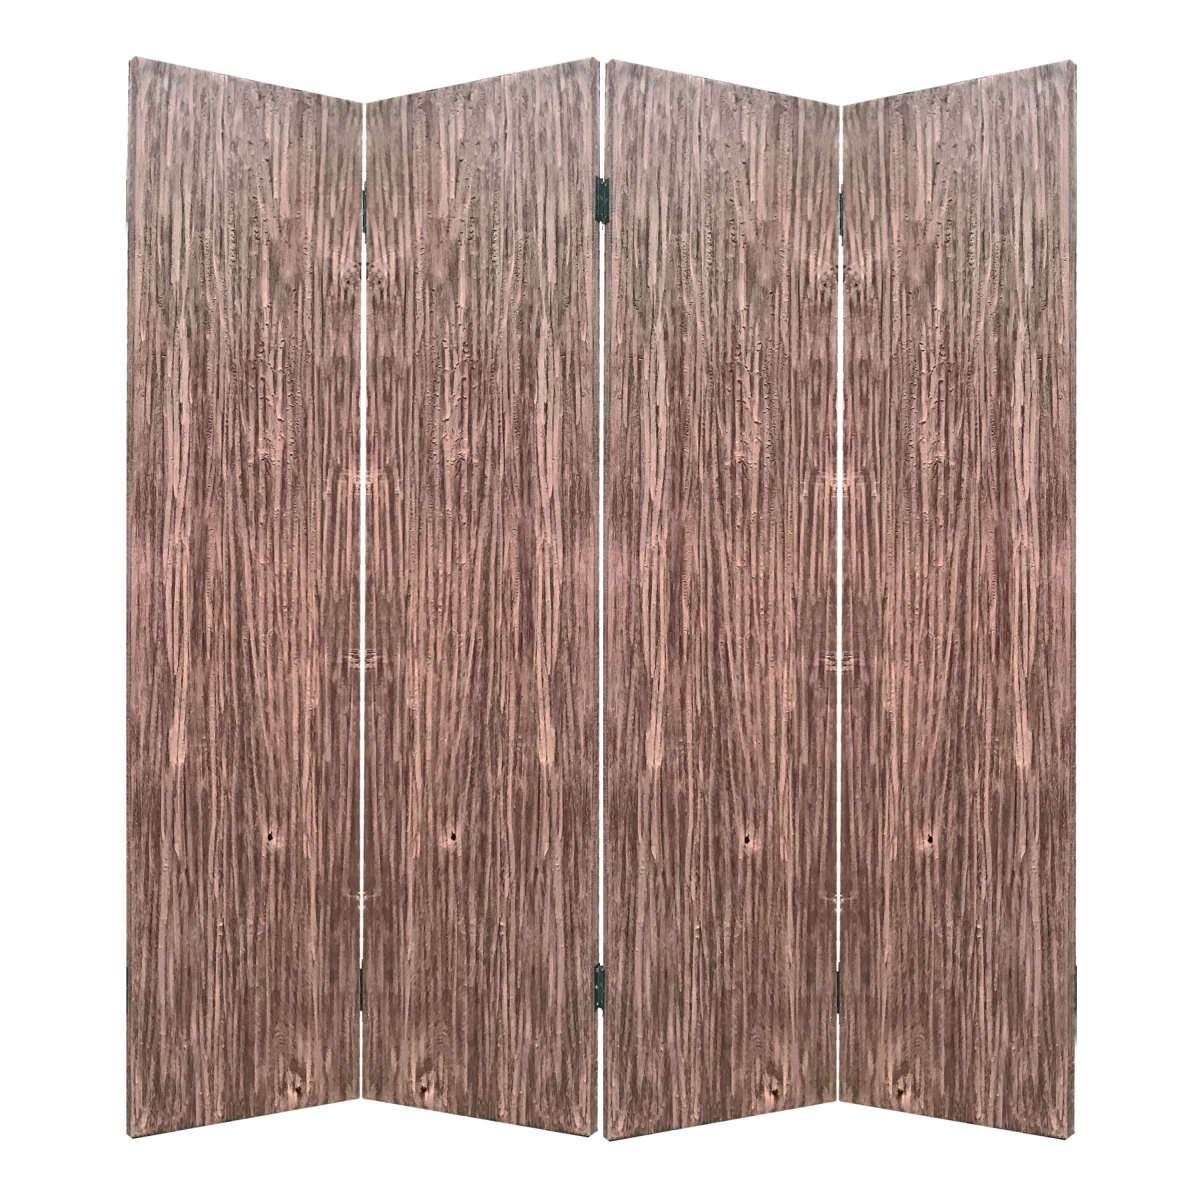 342772 84 X 2 X 84 In. Brown Wood Woodland Screen With 4 Panel